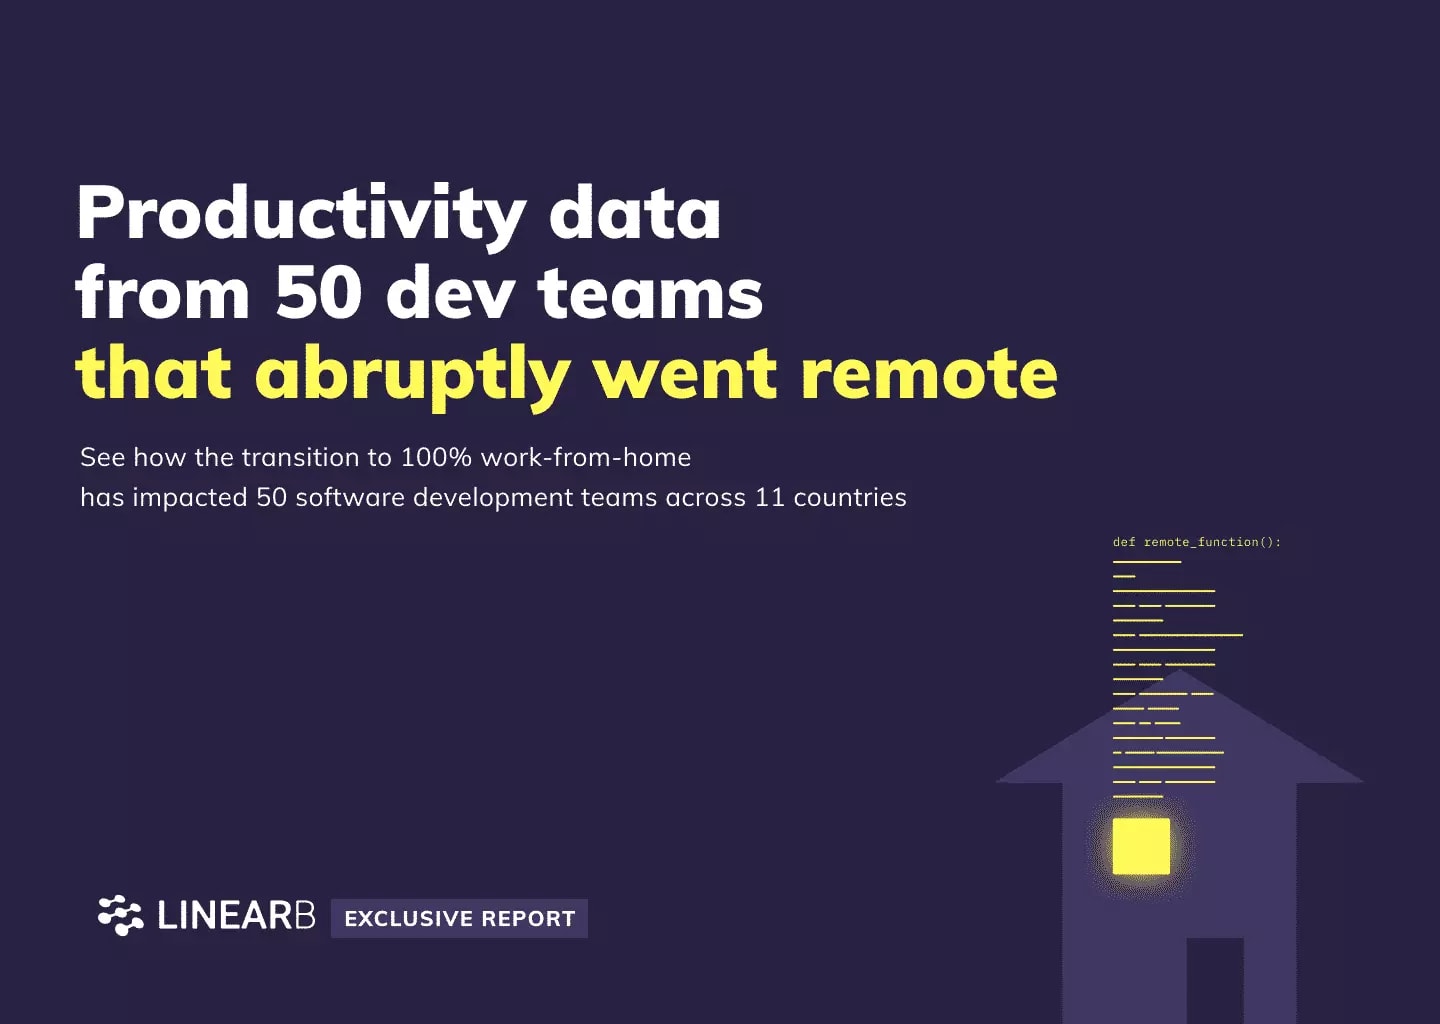 Productivity data from 50 dev teams: report